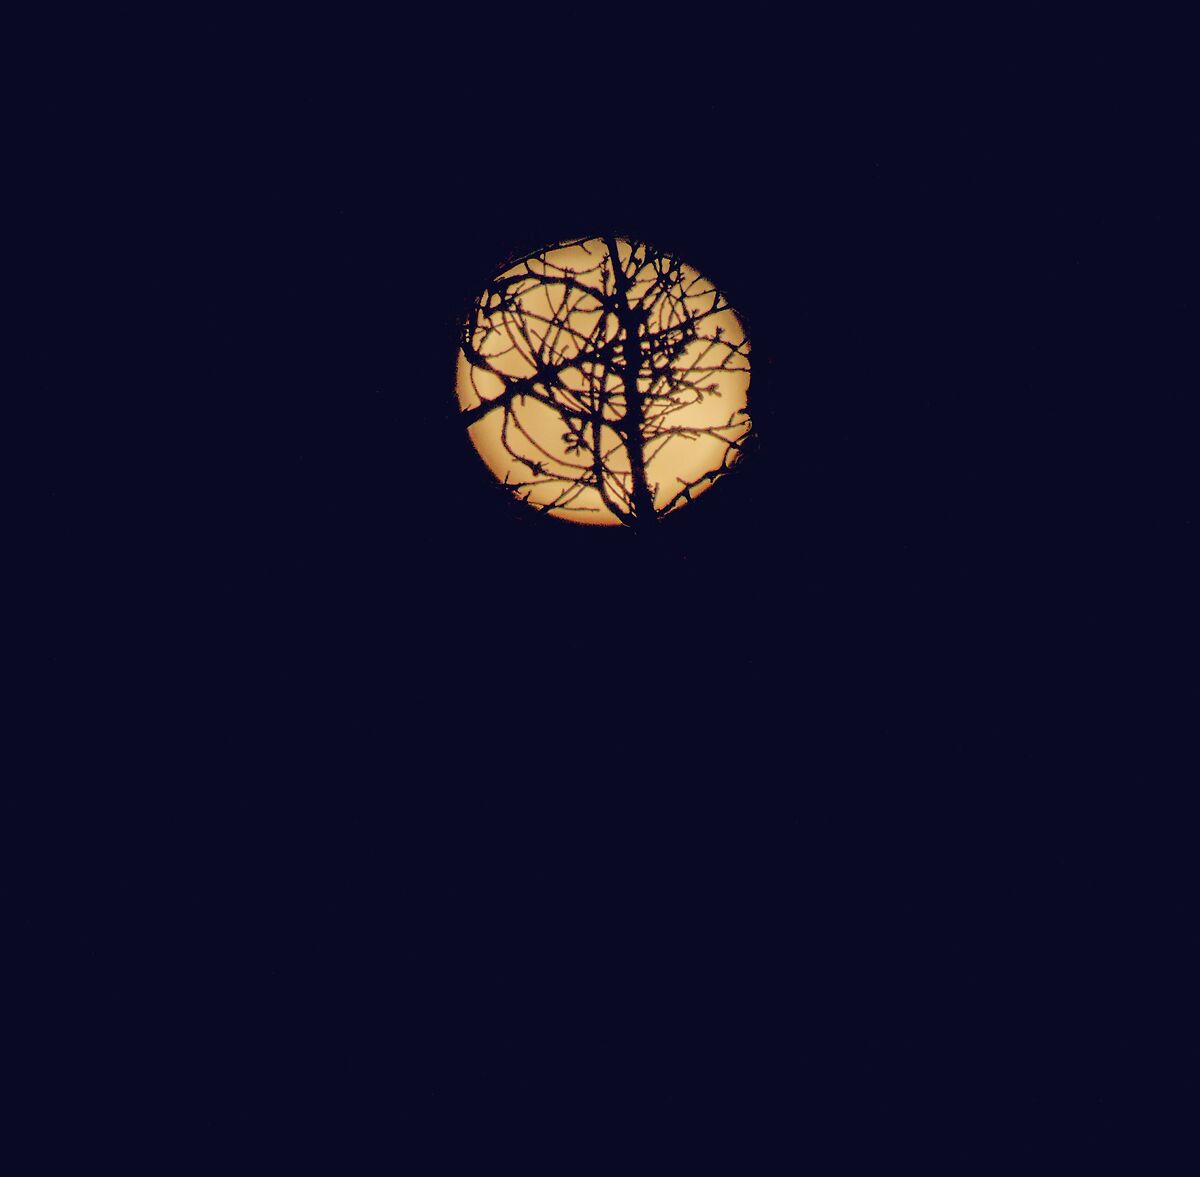 Moon harnessed in the branches of any tree...